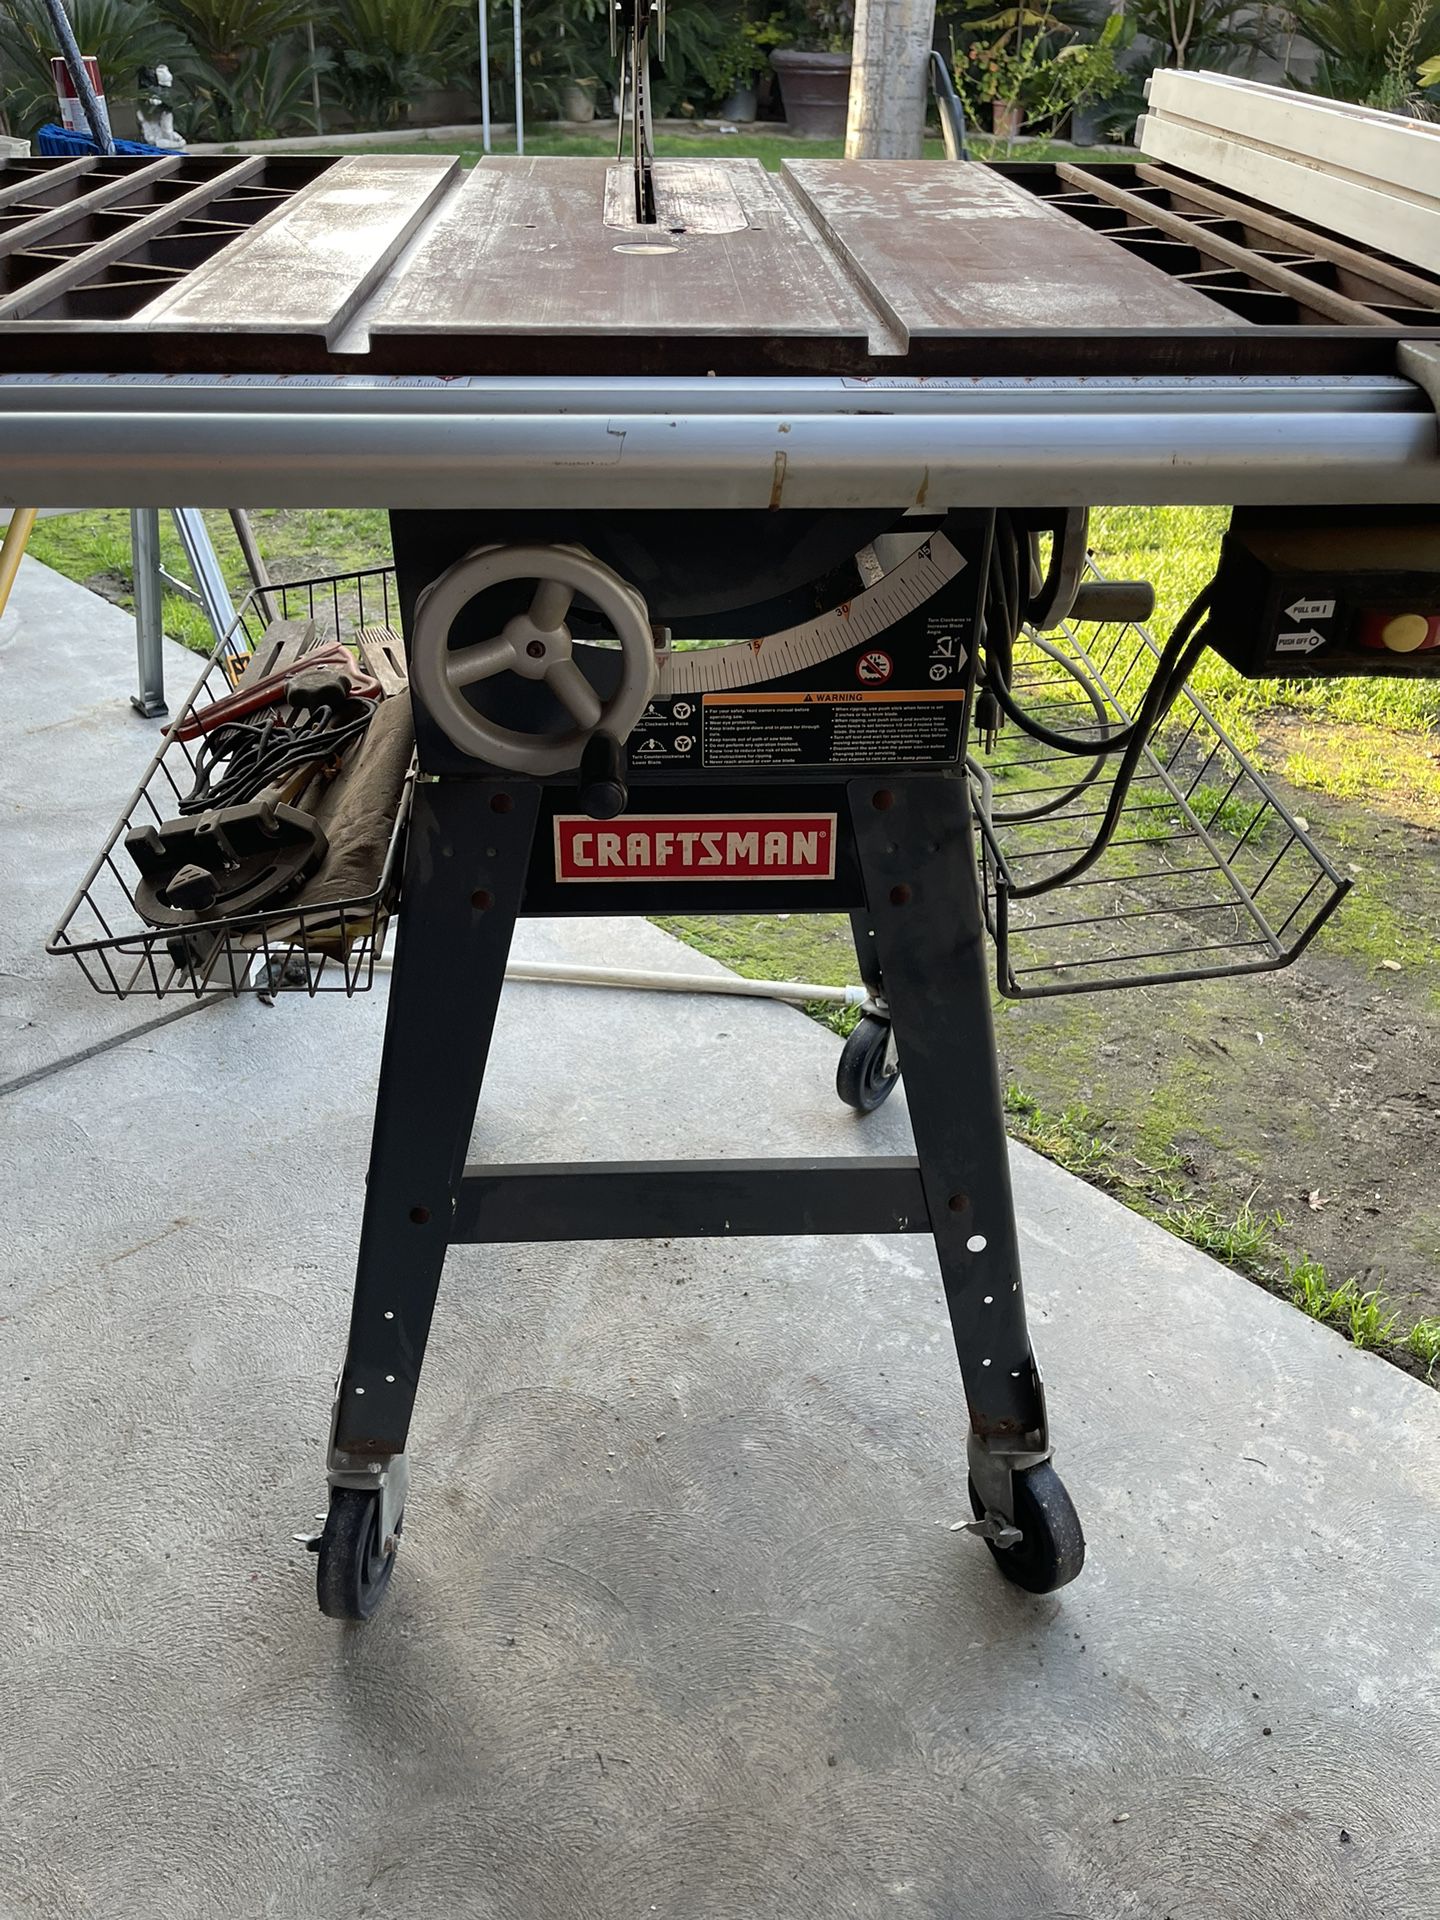  Craftsman Table Saw 10 Inches.  